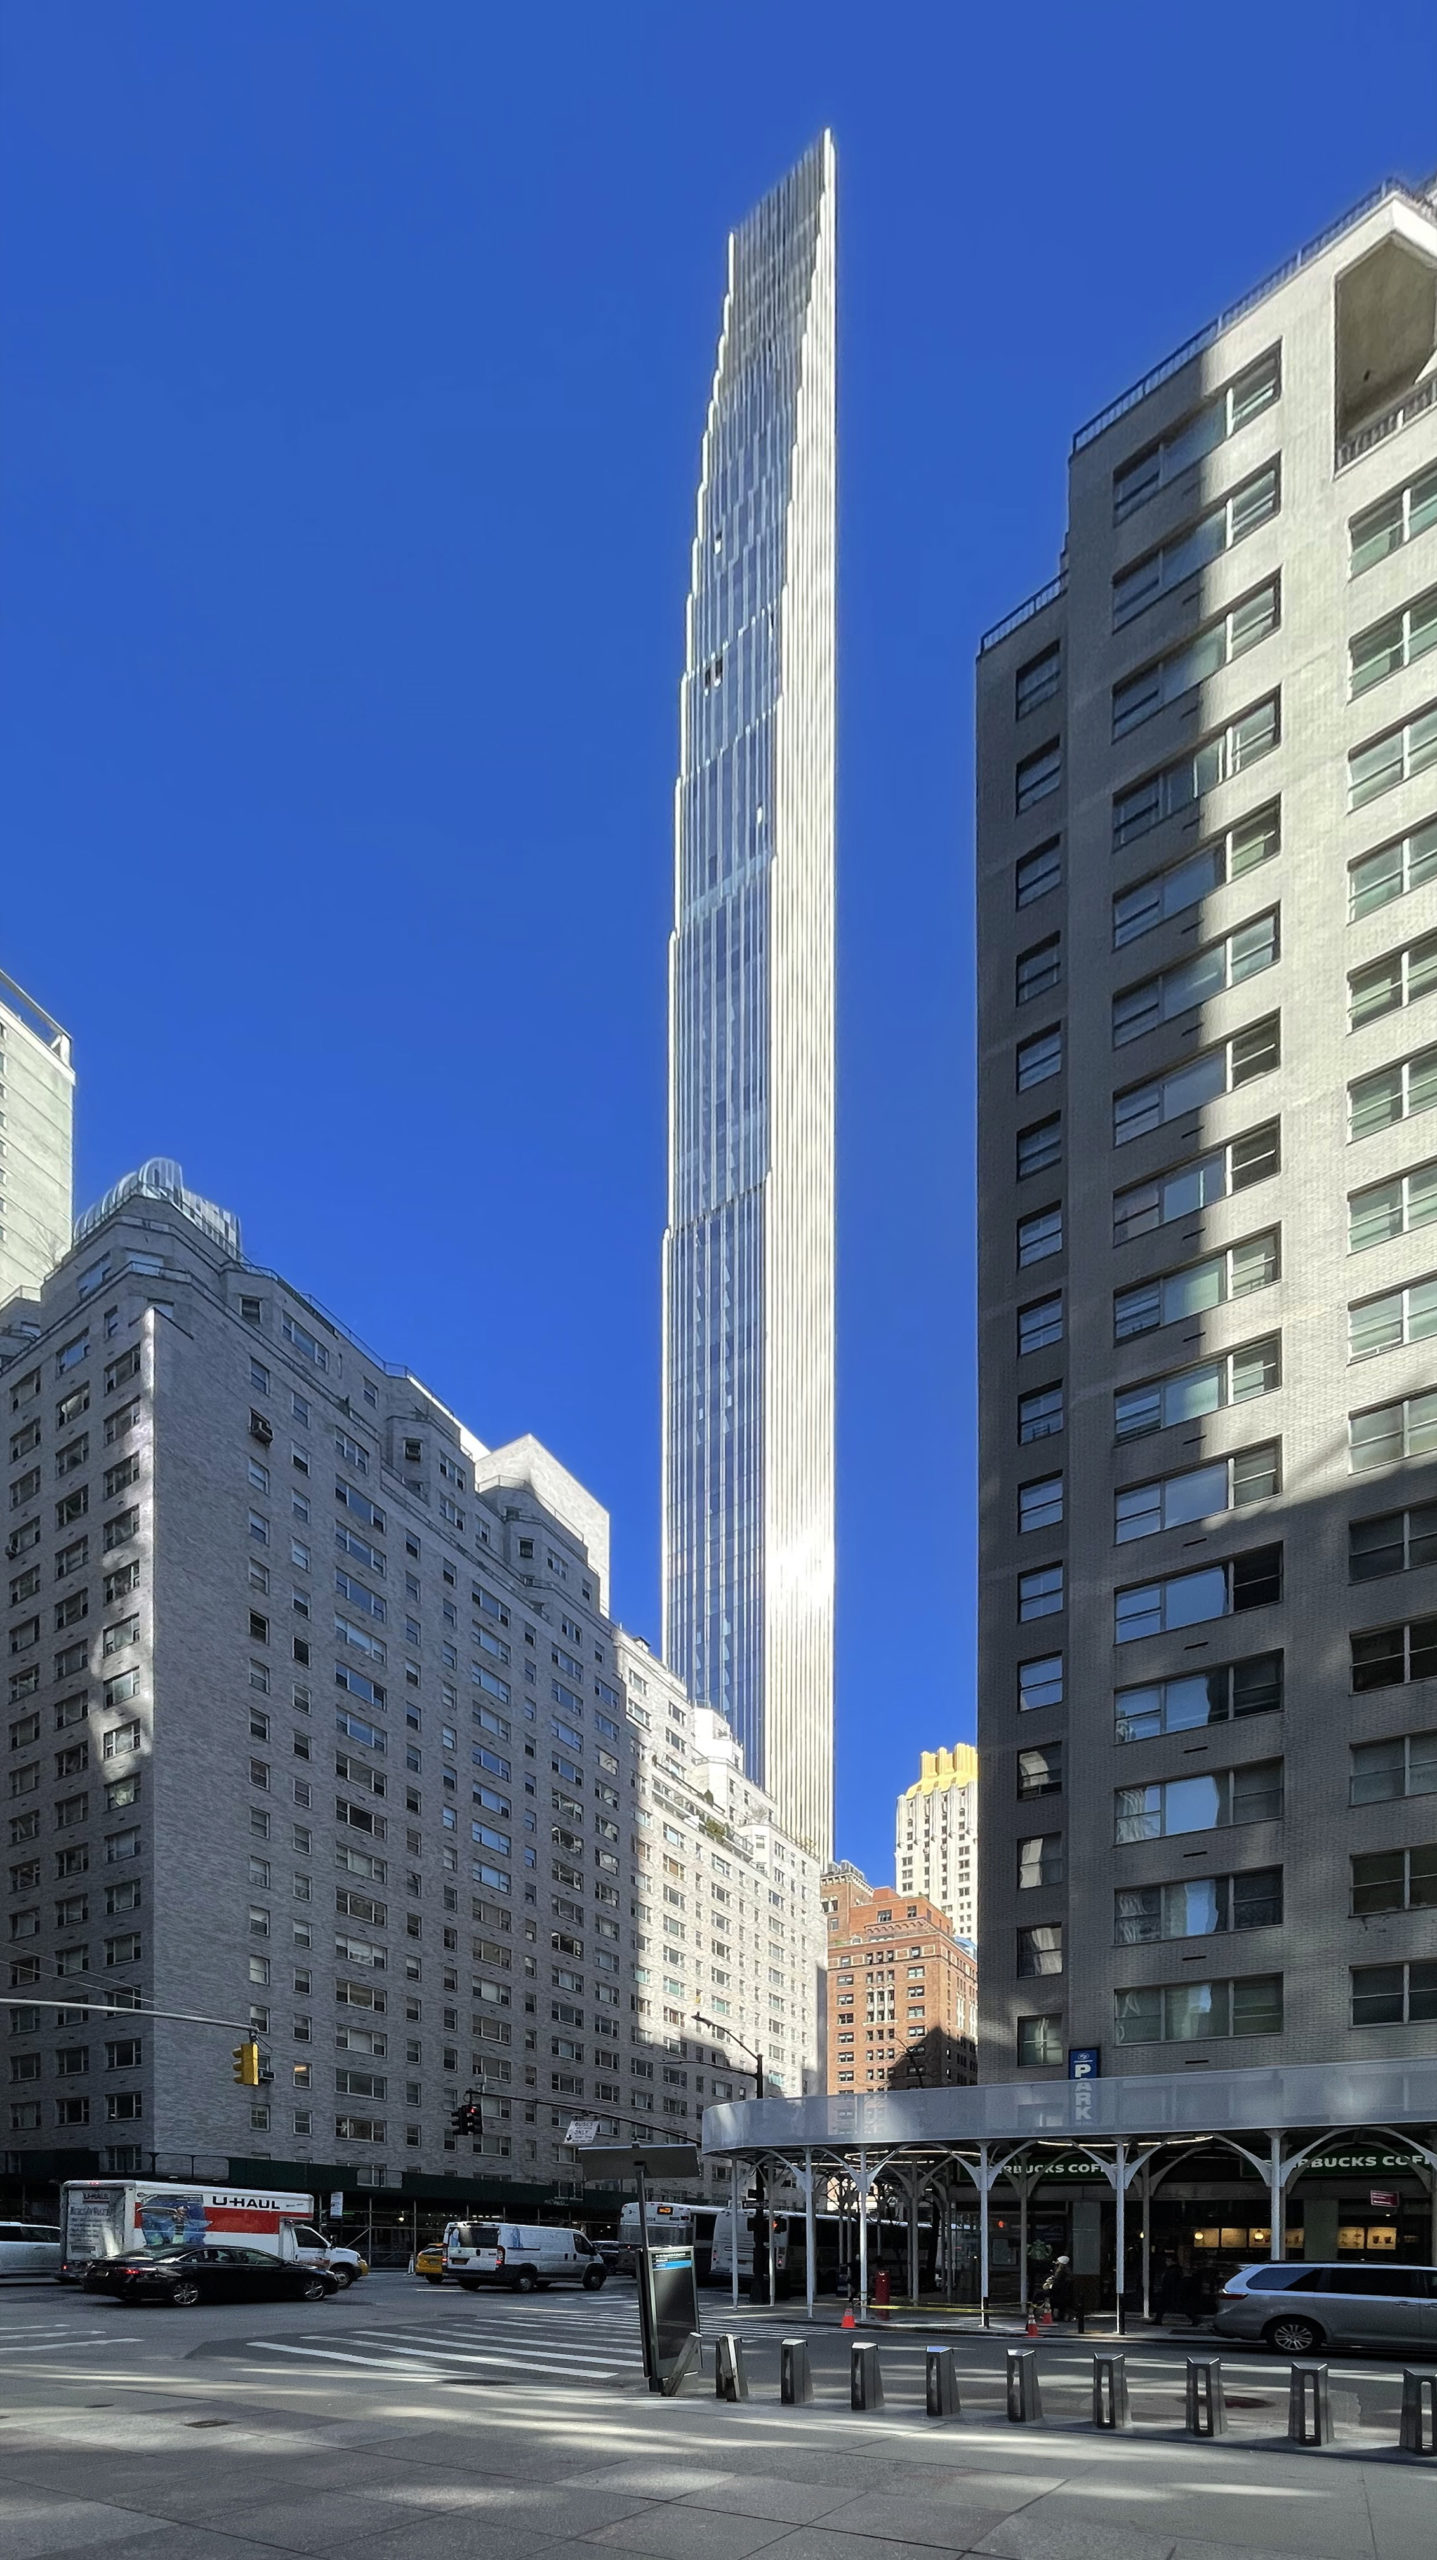 TikTok investor Tim Gong buys two condos at 111 W. 57th St.